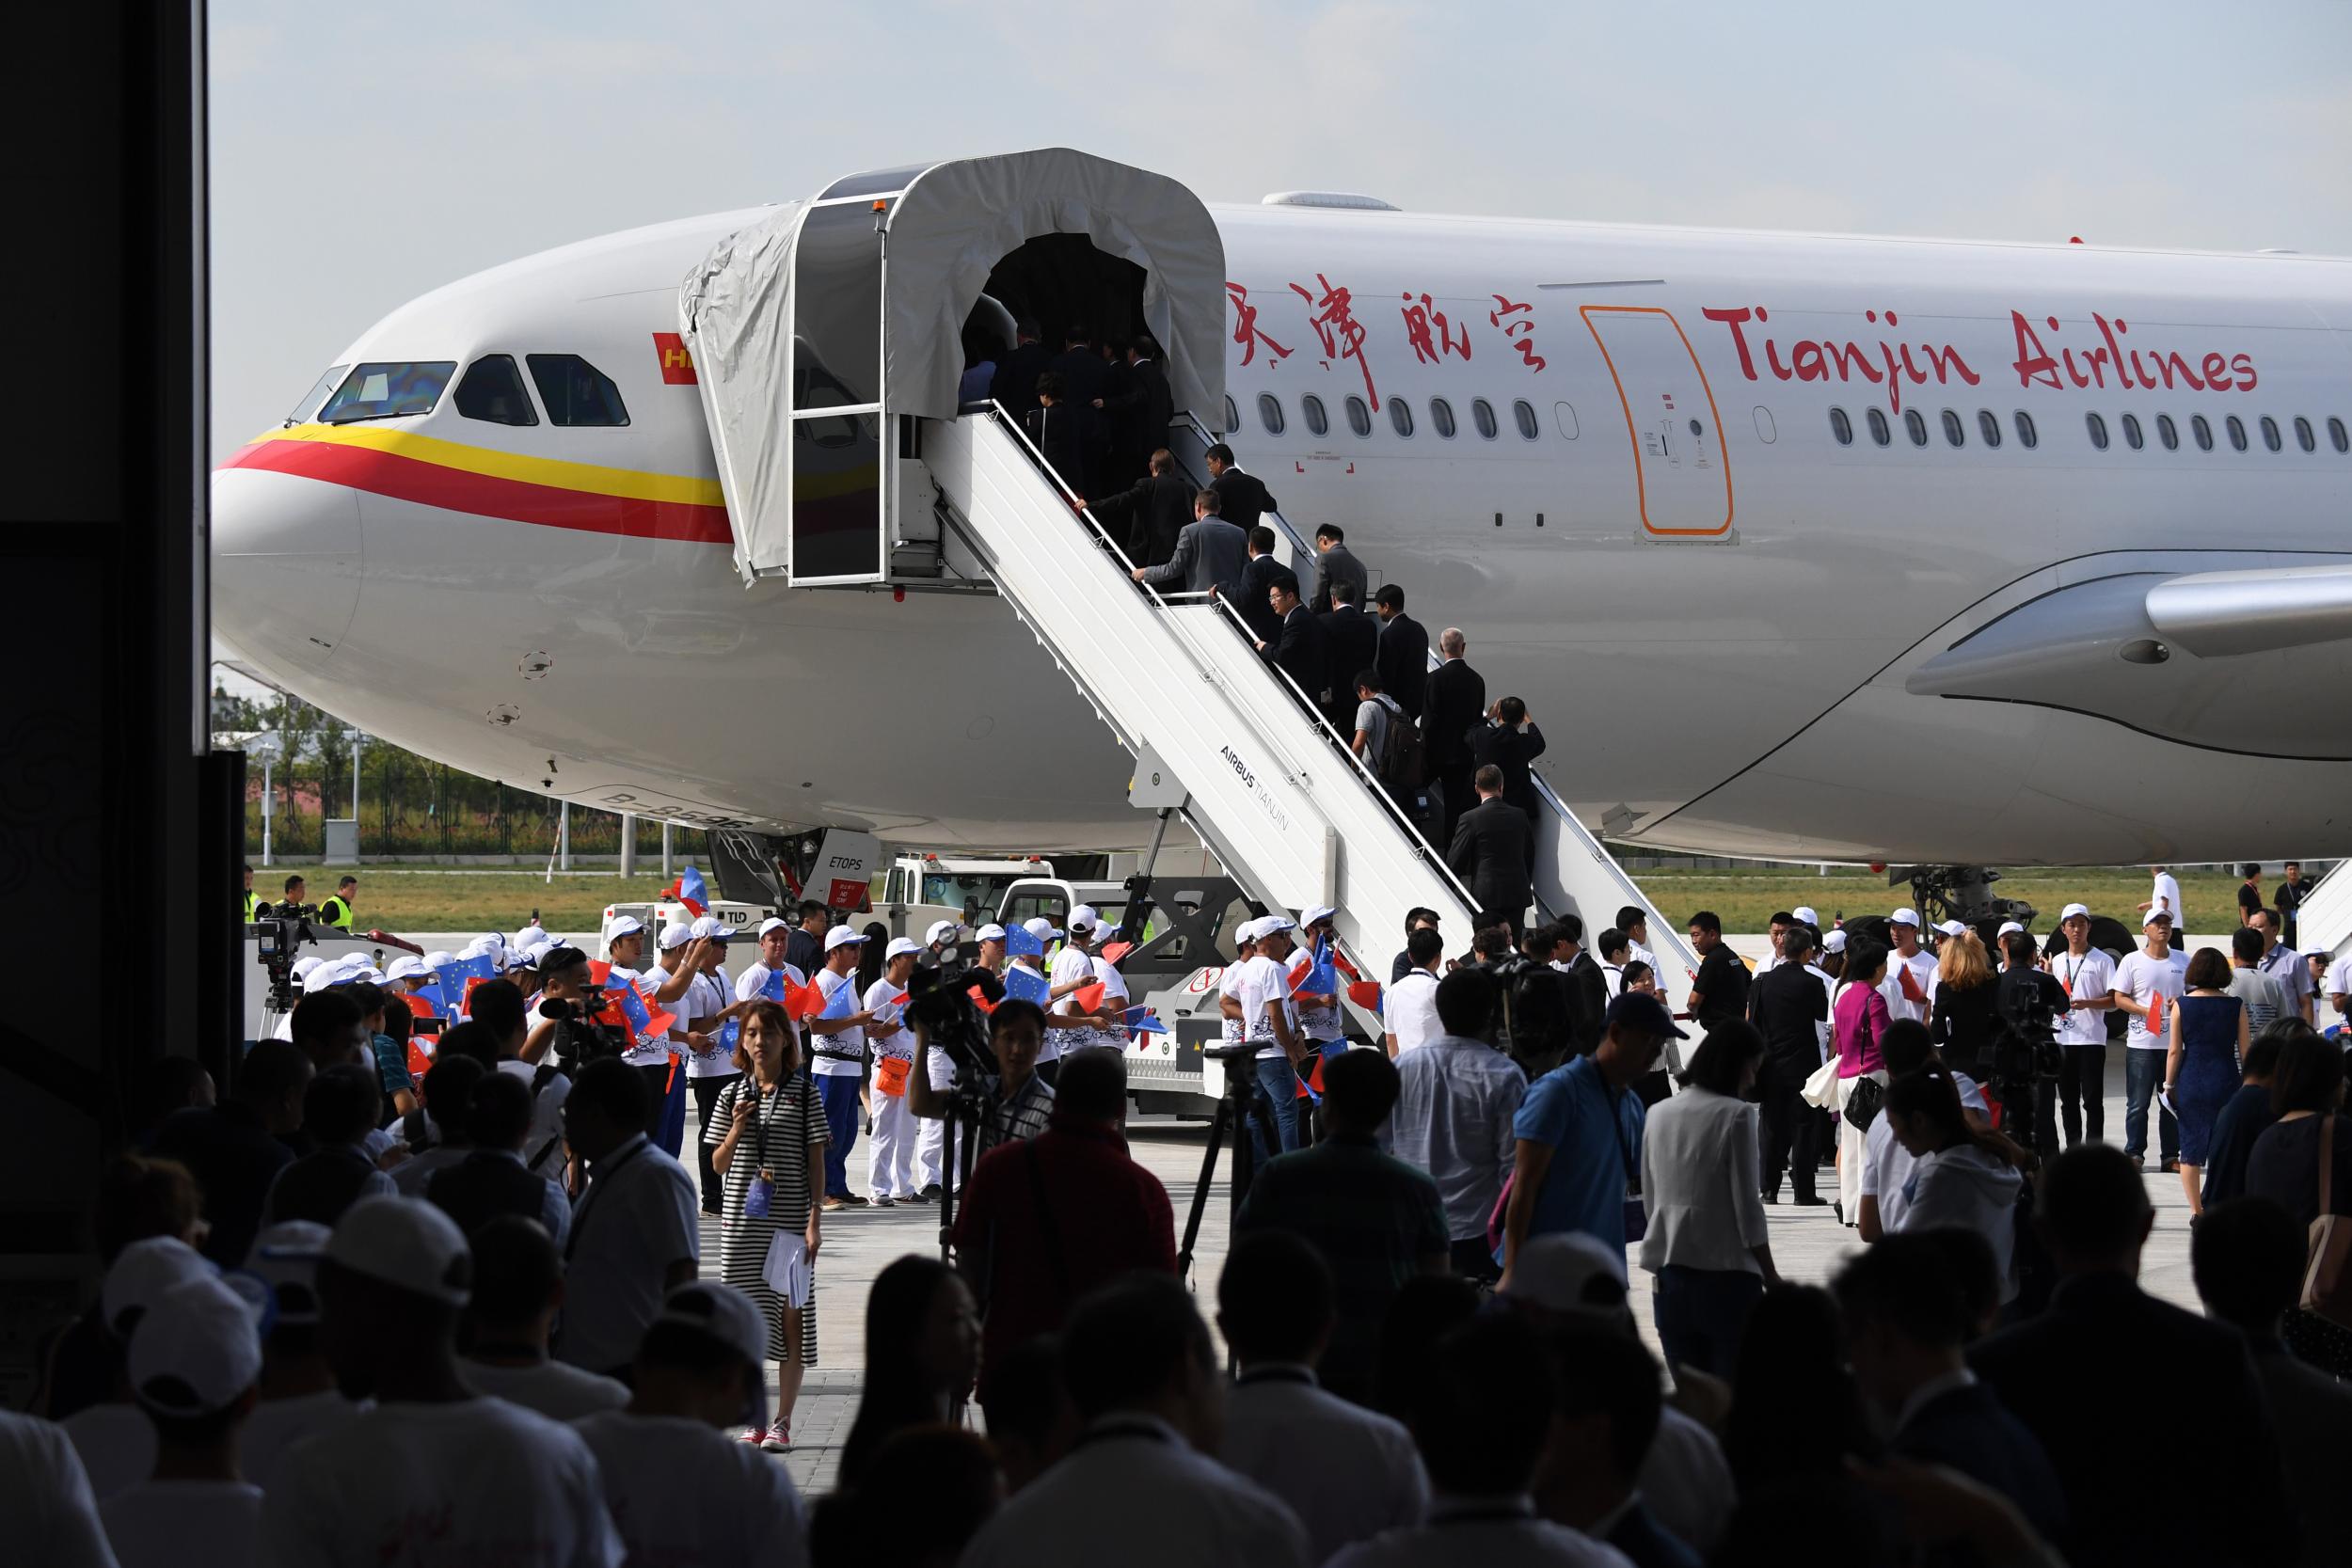 The Tianjin Airlines flight was transferred to a replacement aircraft